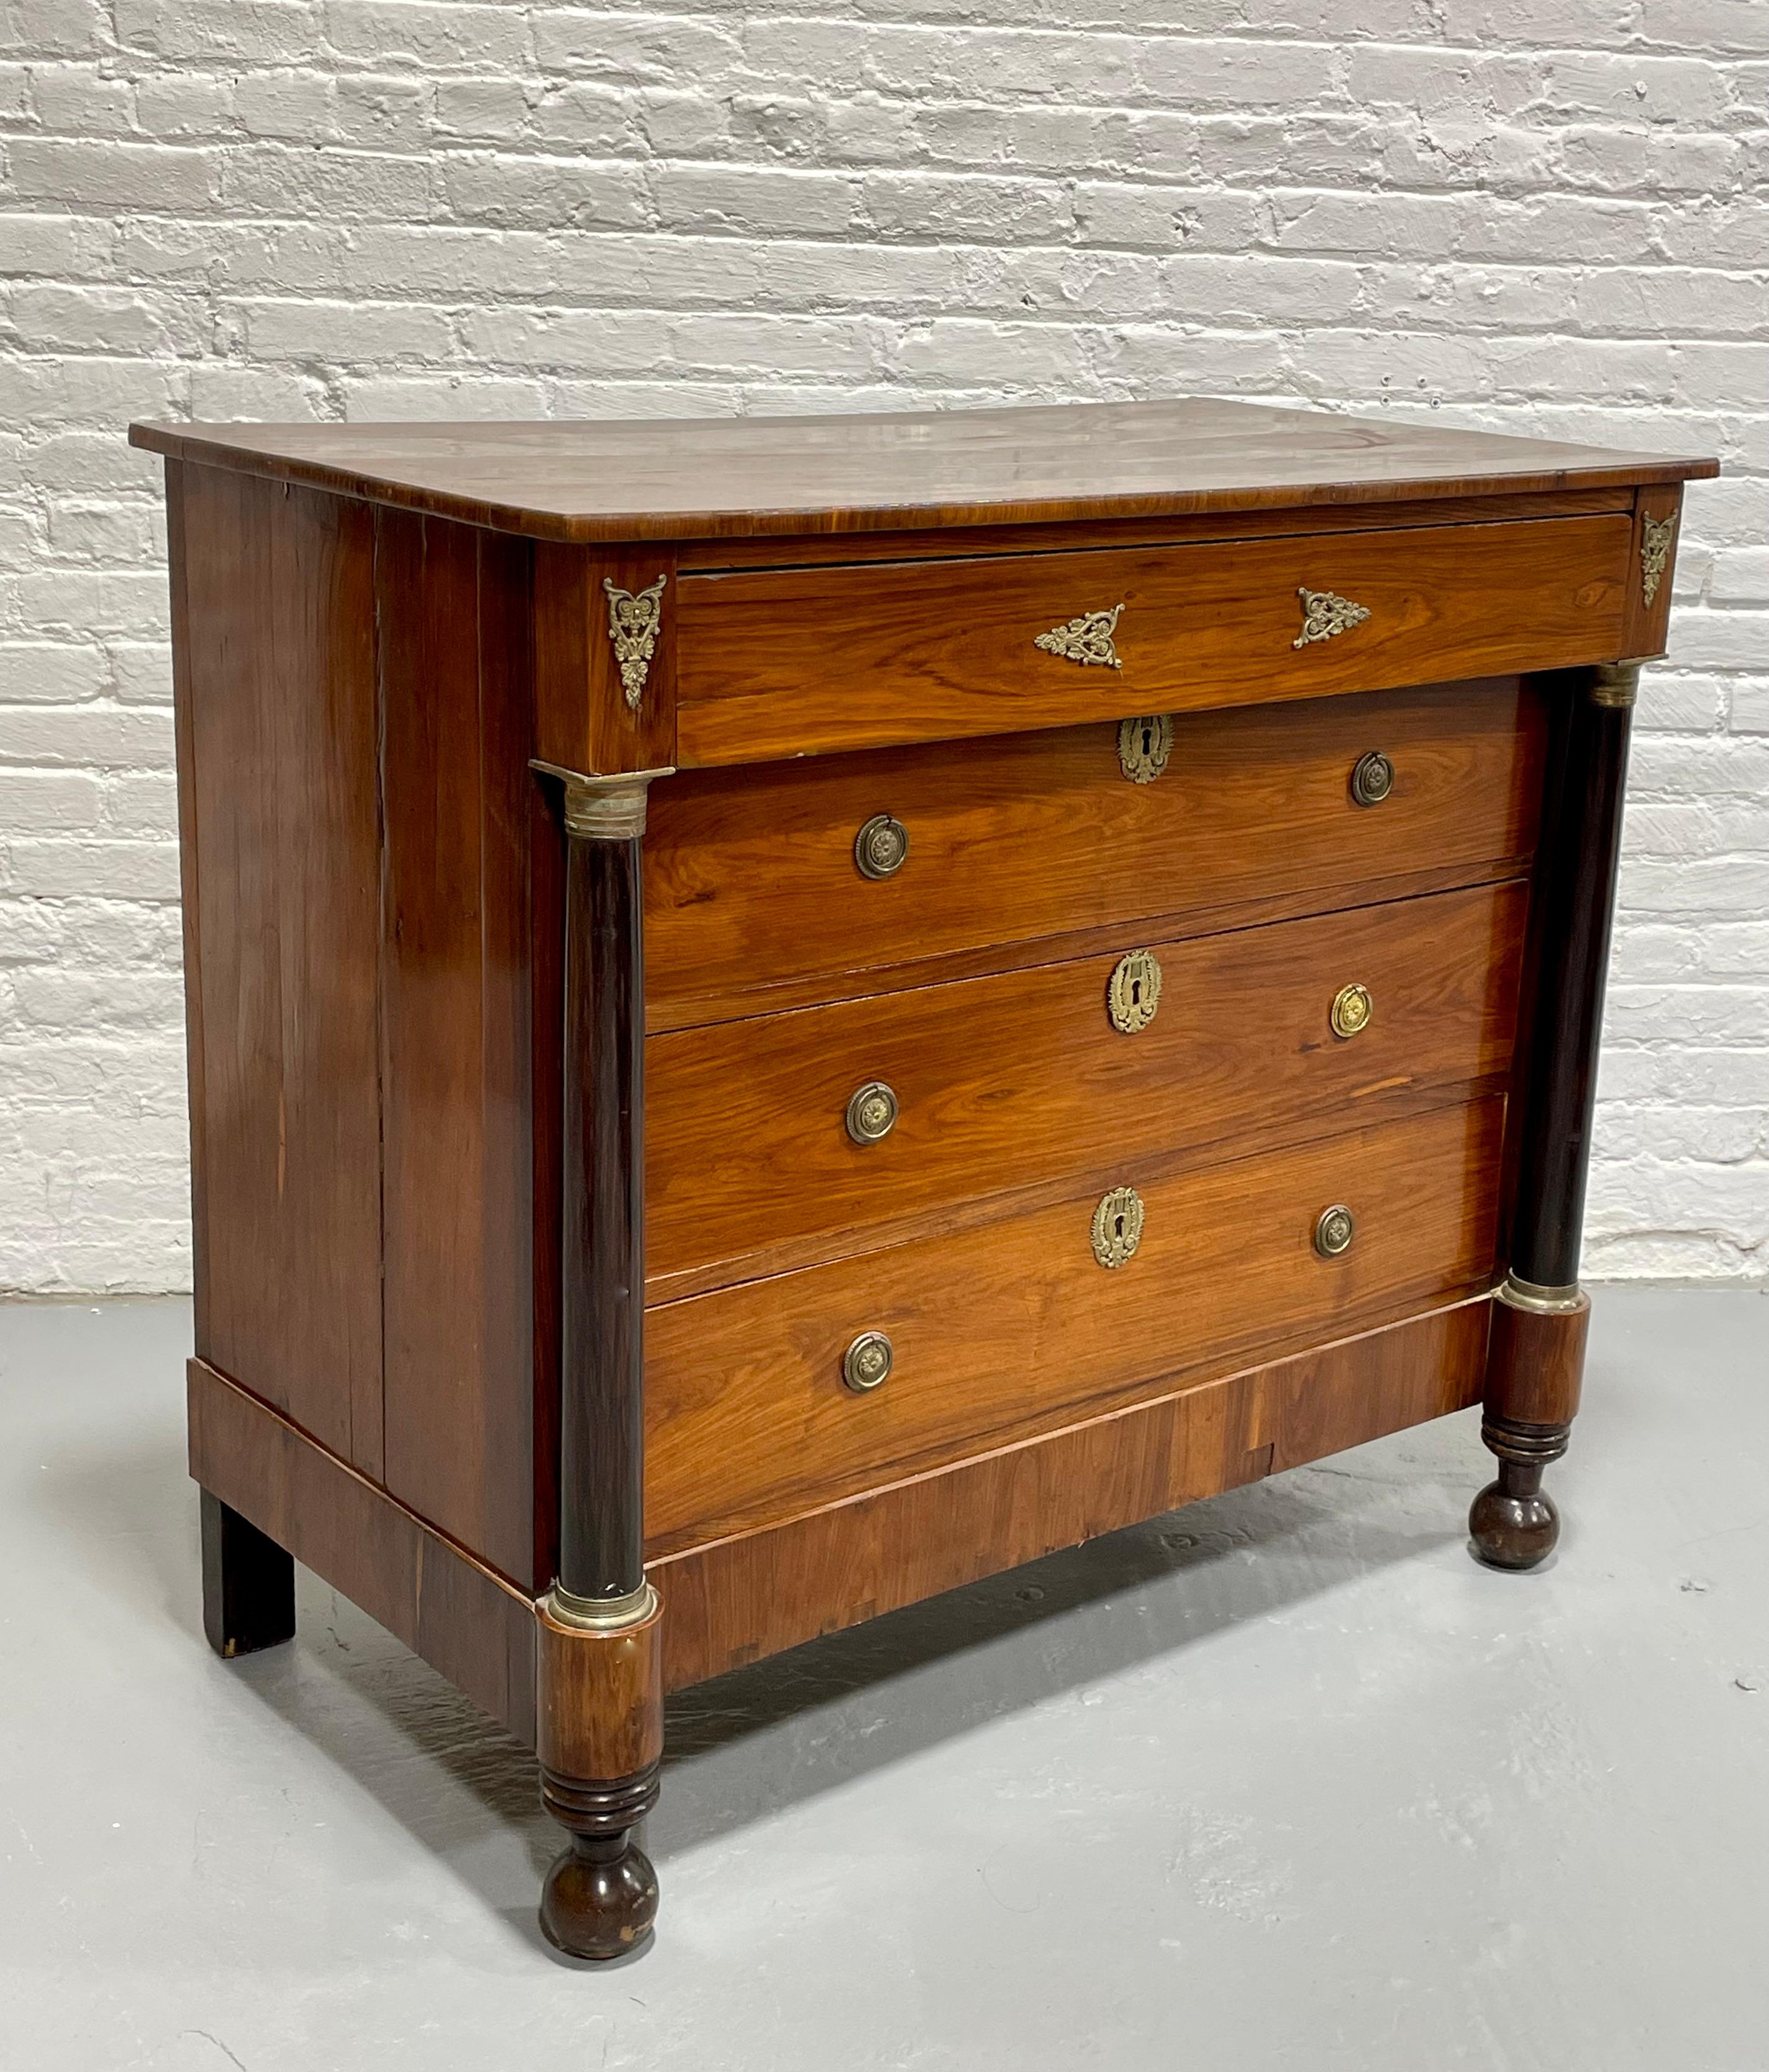 French First Empire Period Chest of Drawers / Commode / Dresser, c. 1810 For Sale 2